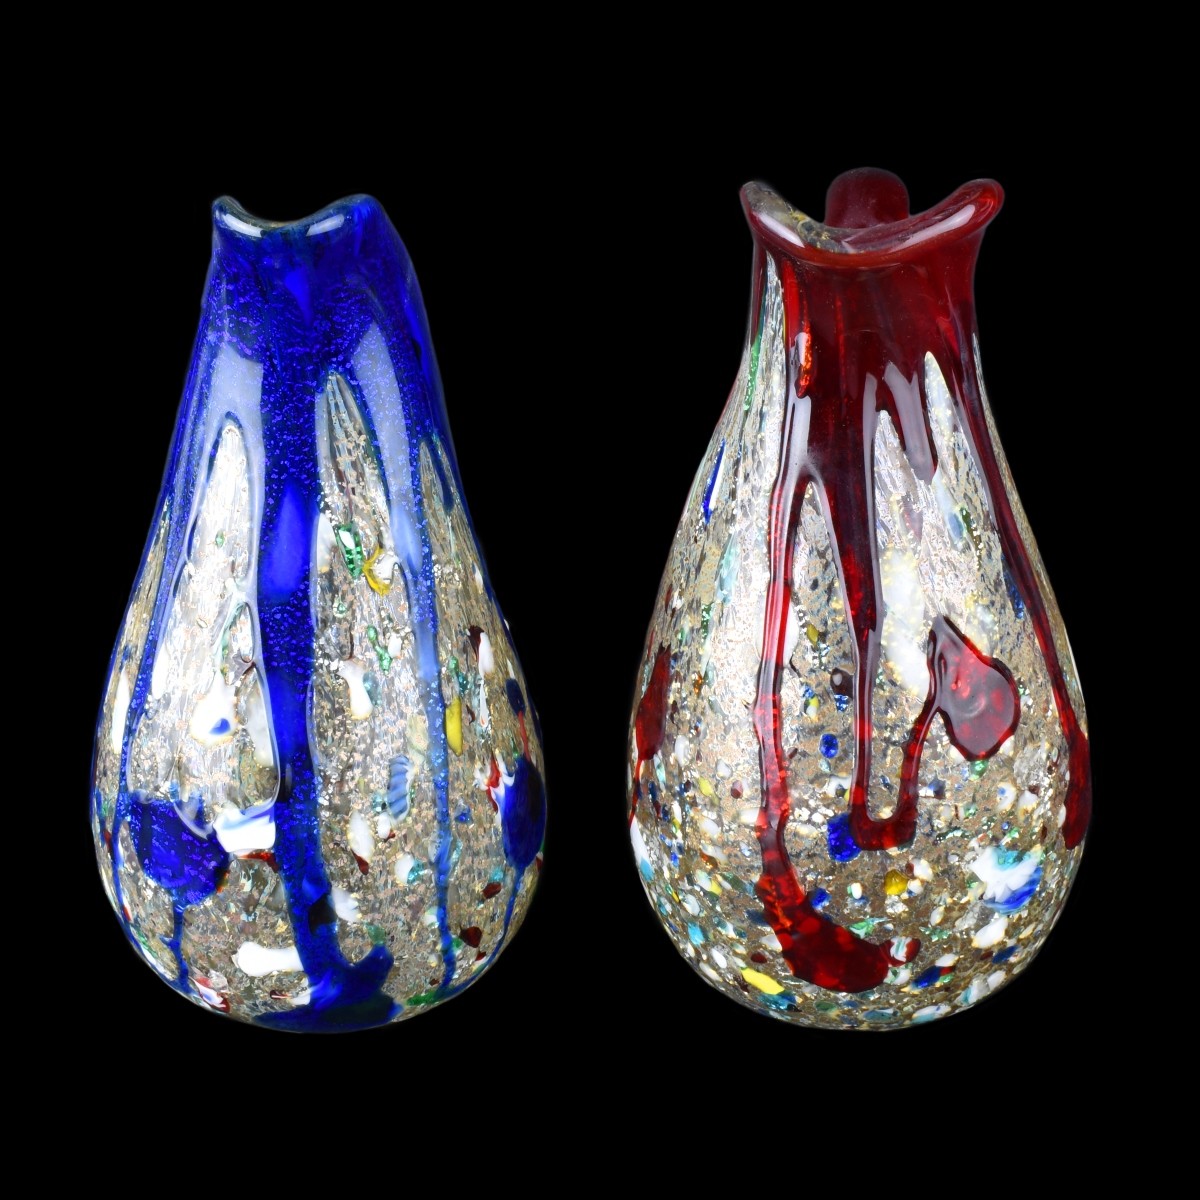 Two (2) Vintage Murano Art Glass Pitchers